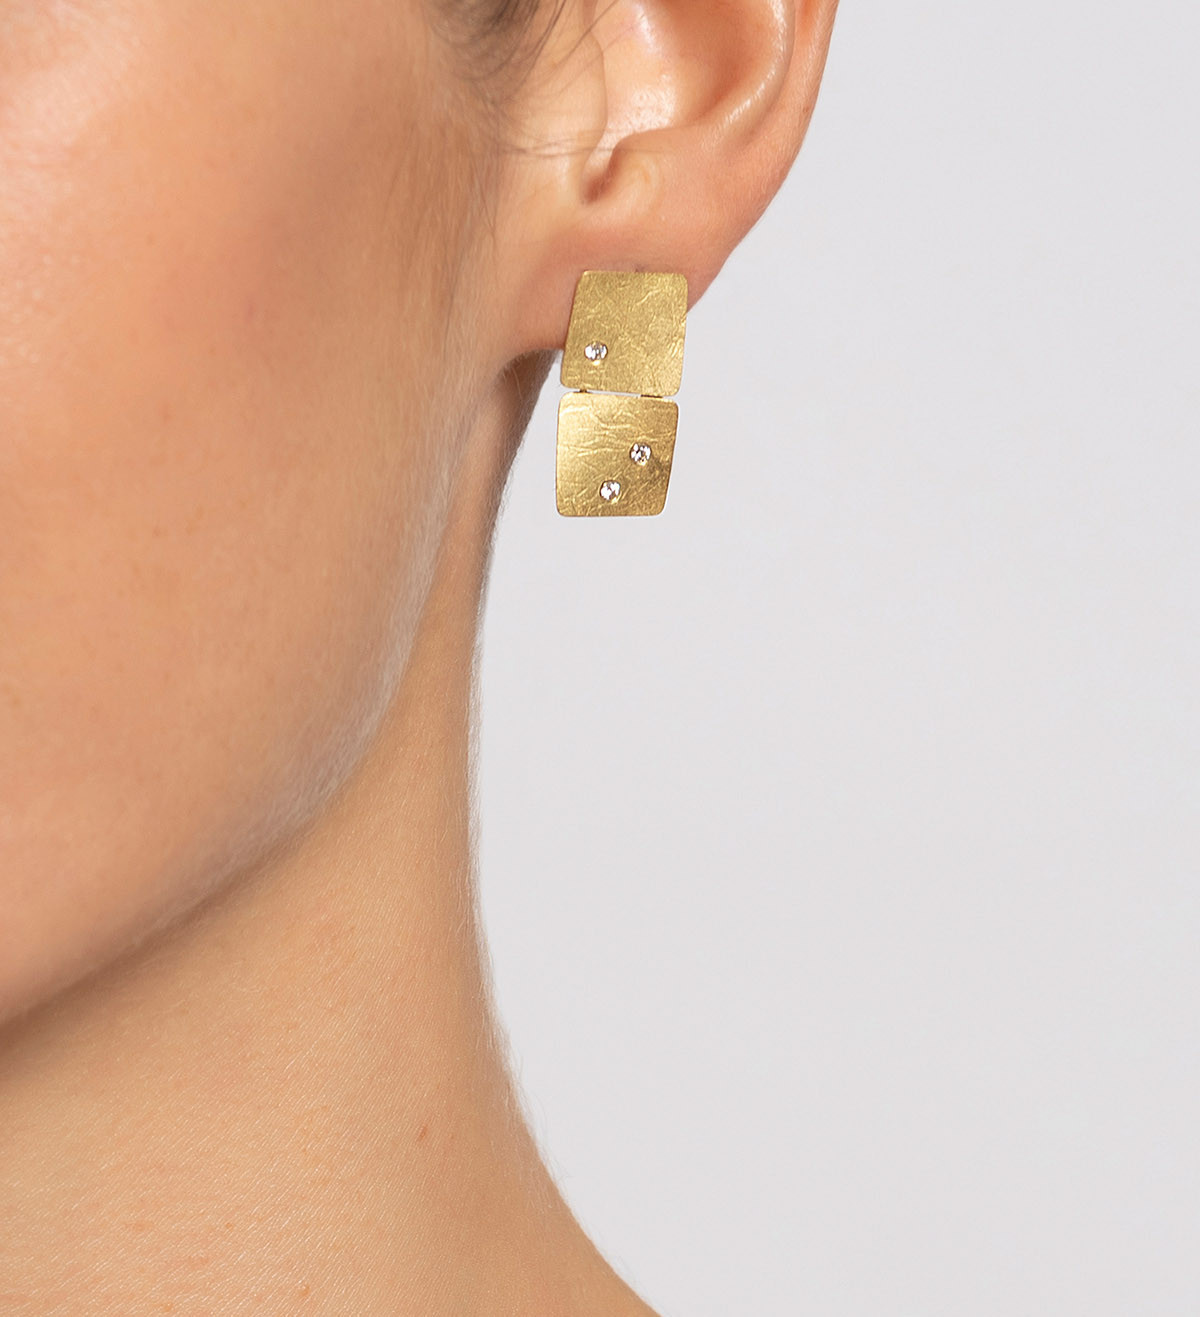 18k gold earrings Ones 22mm with diamonds 0,15ct